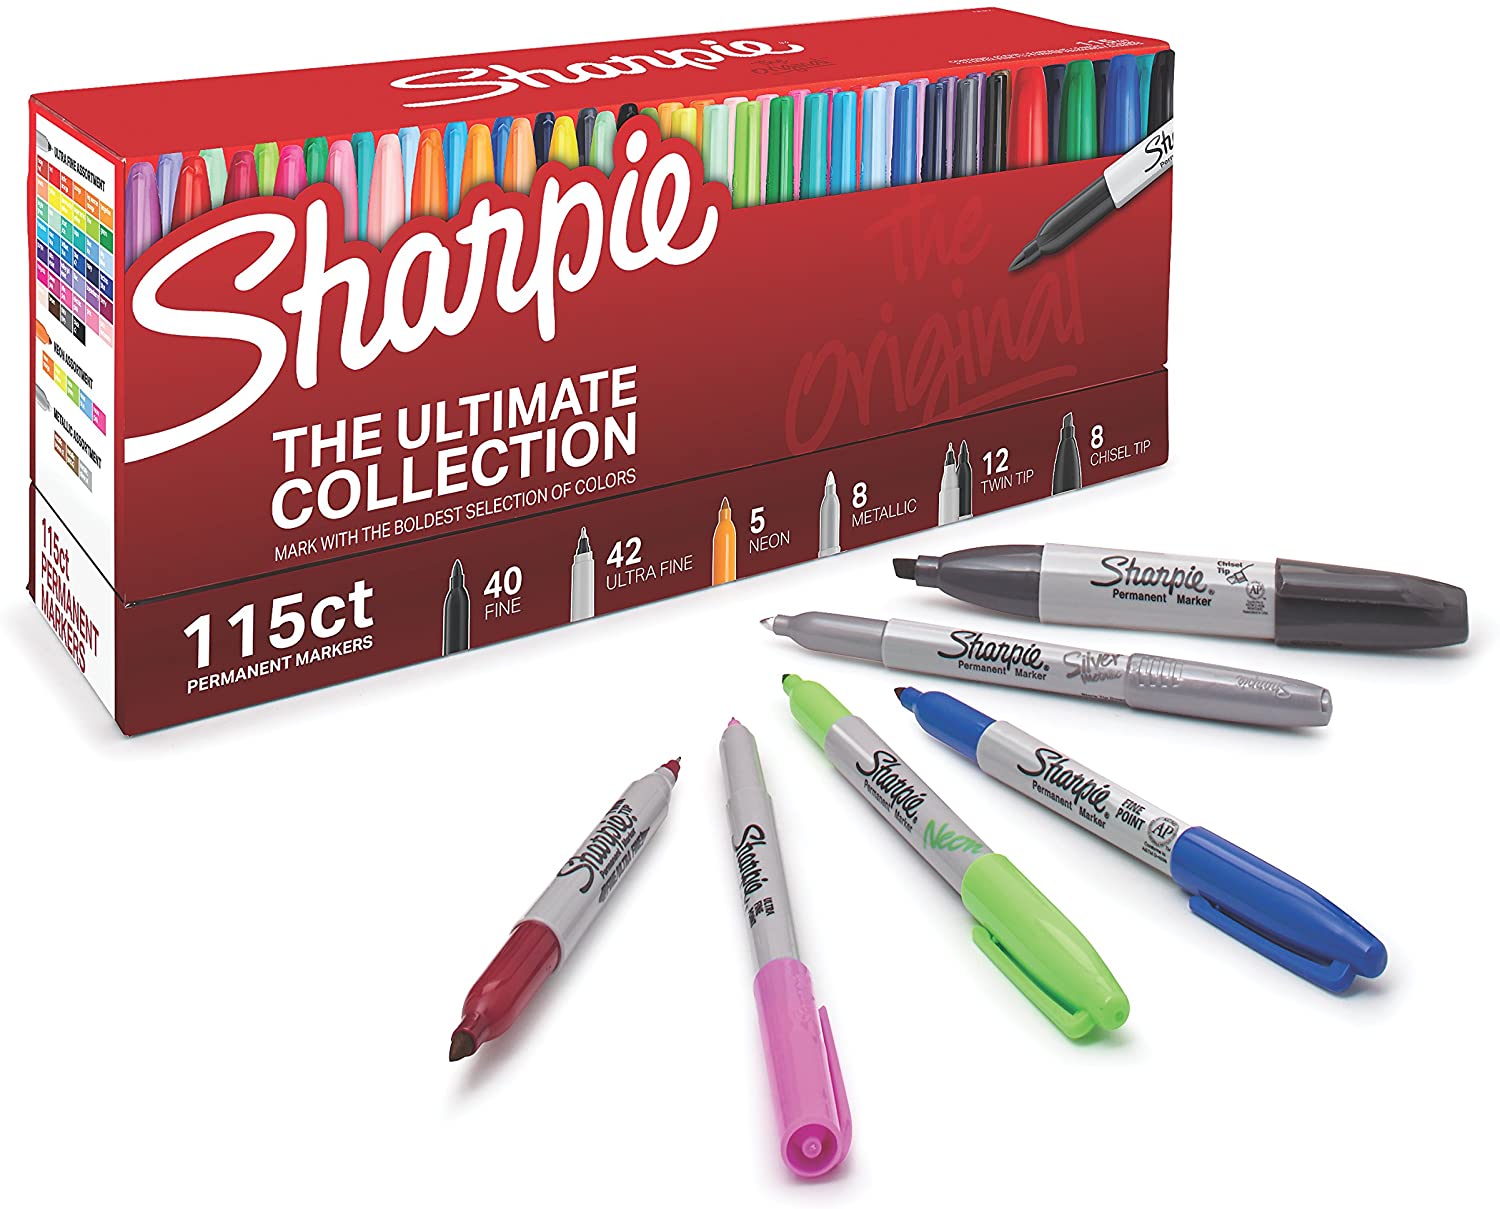 Sharpie The Ultimate Collection 115 Permanent Markers